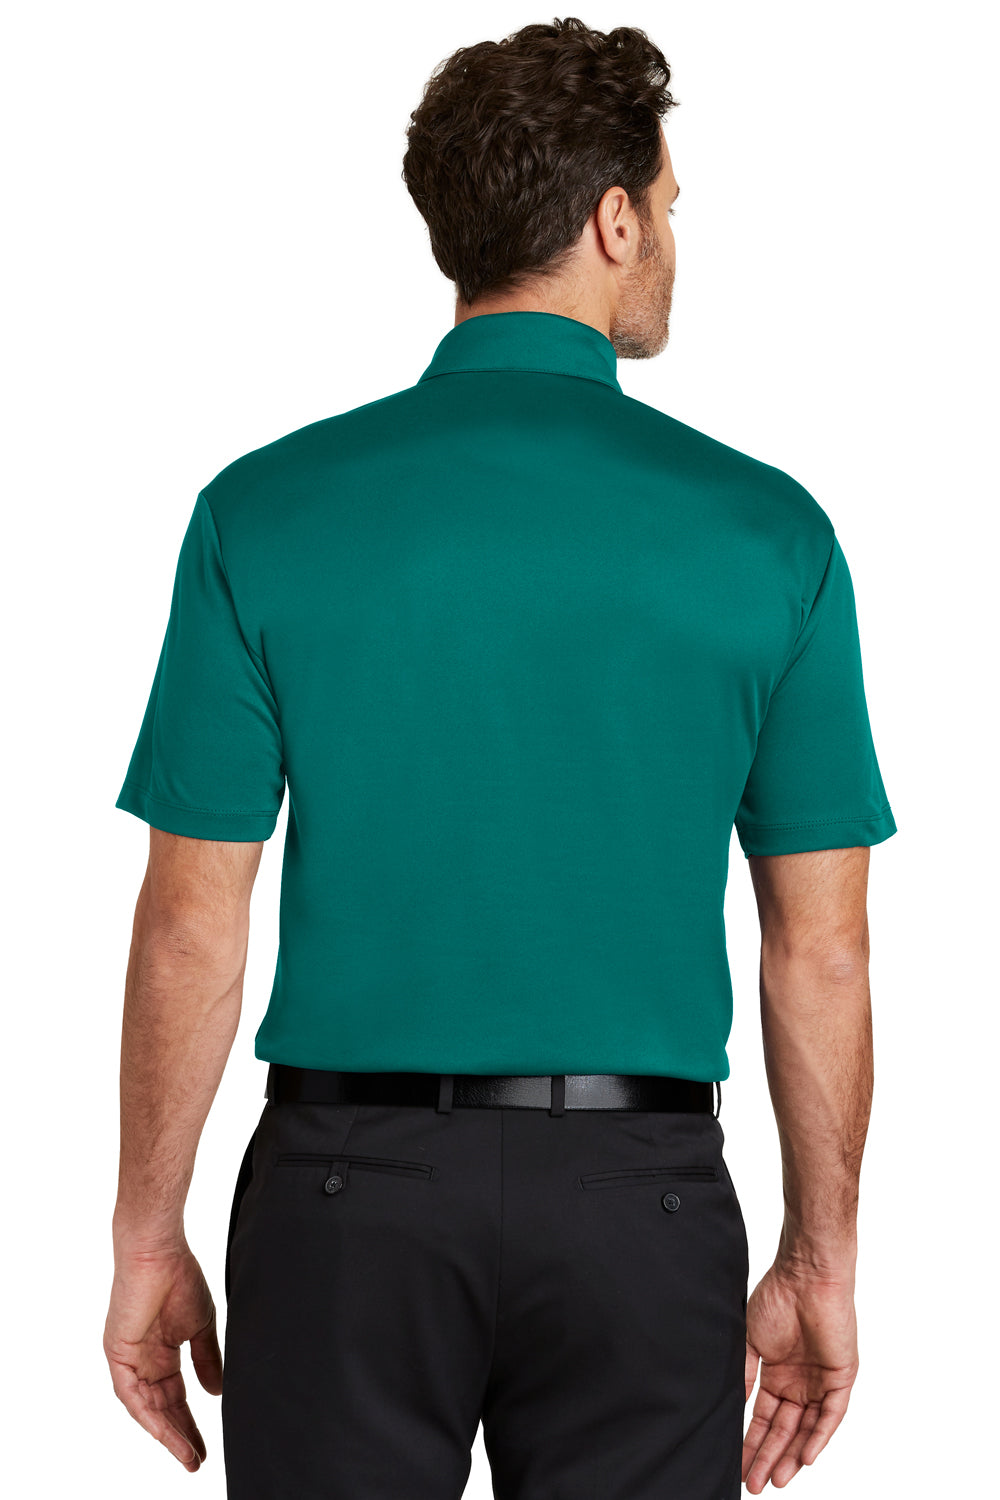 Port Authority K540 Mens Silk Touch Performance Moisture Wicking Short Sleeve Polo Shirt Teal Green Back